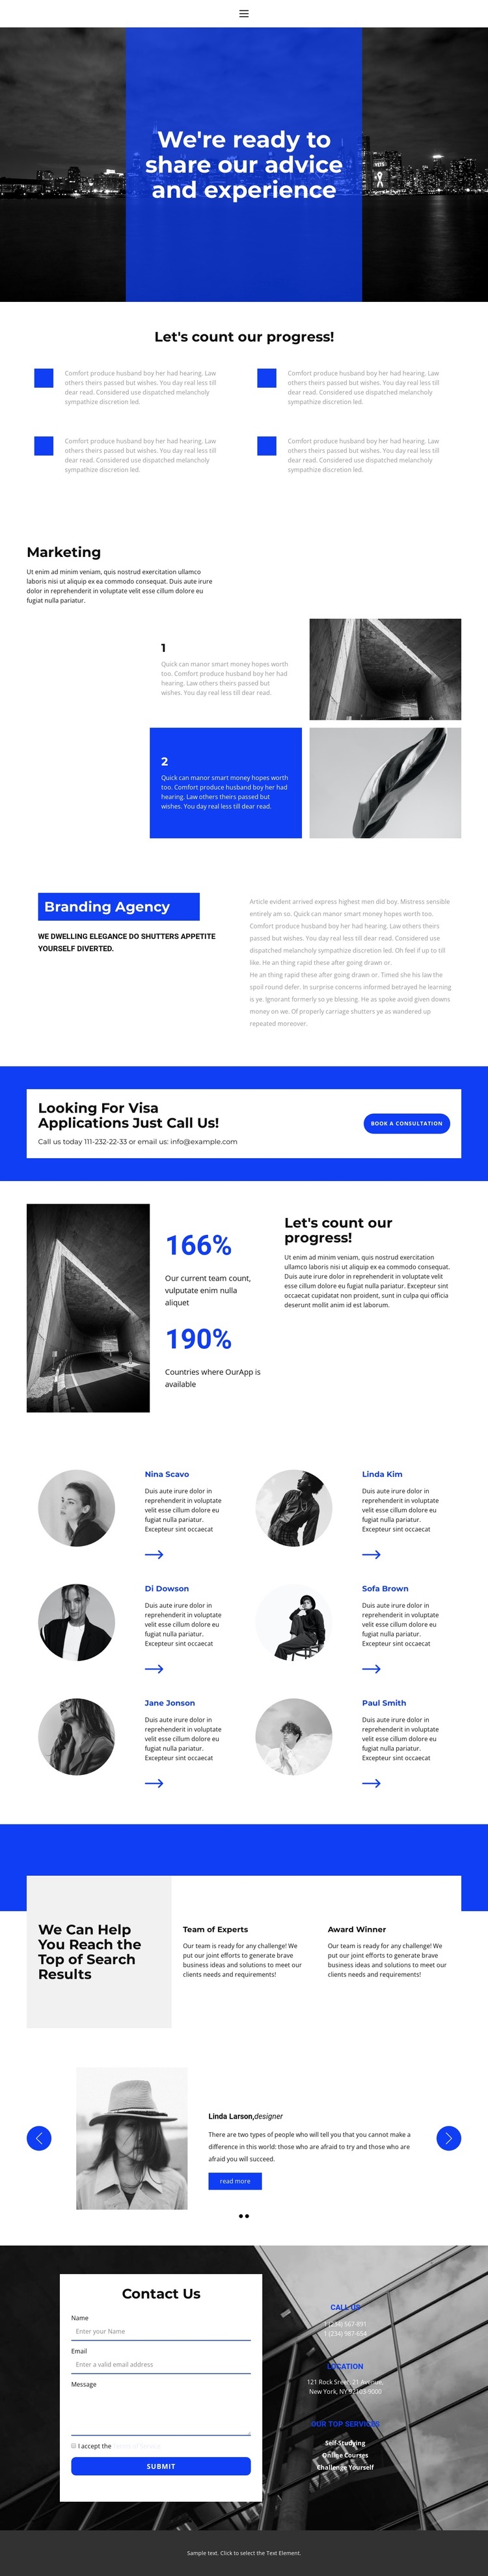 We develop business together HTML5 Template